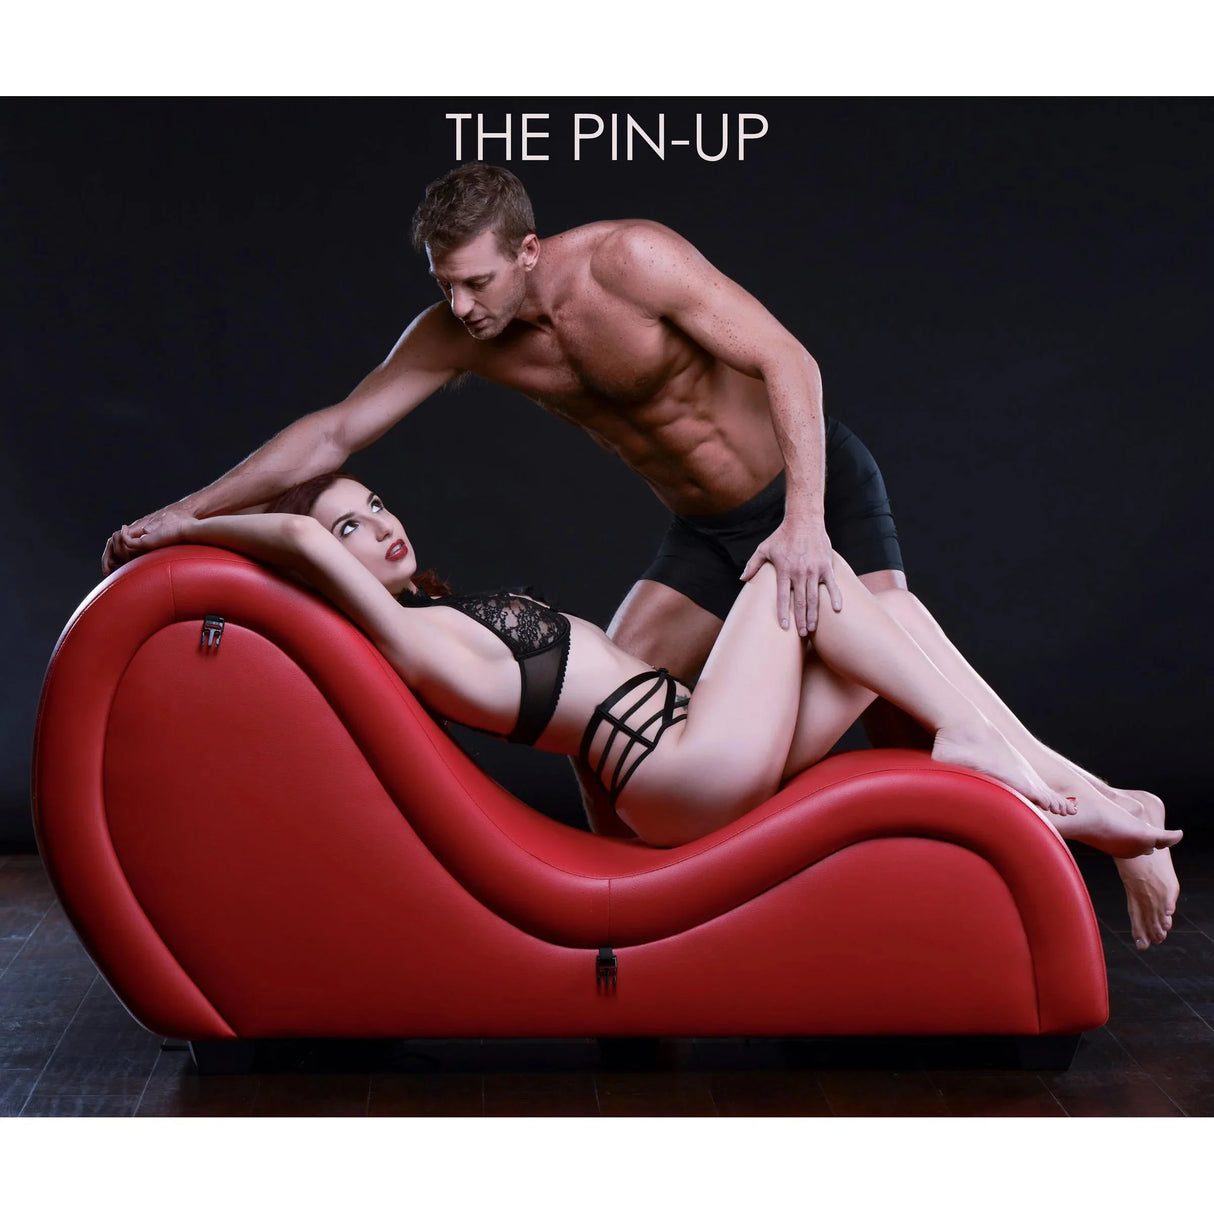 Kinky Couch Sex Chaise Lounge with Love Pillows